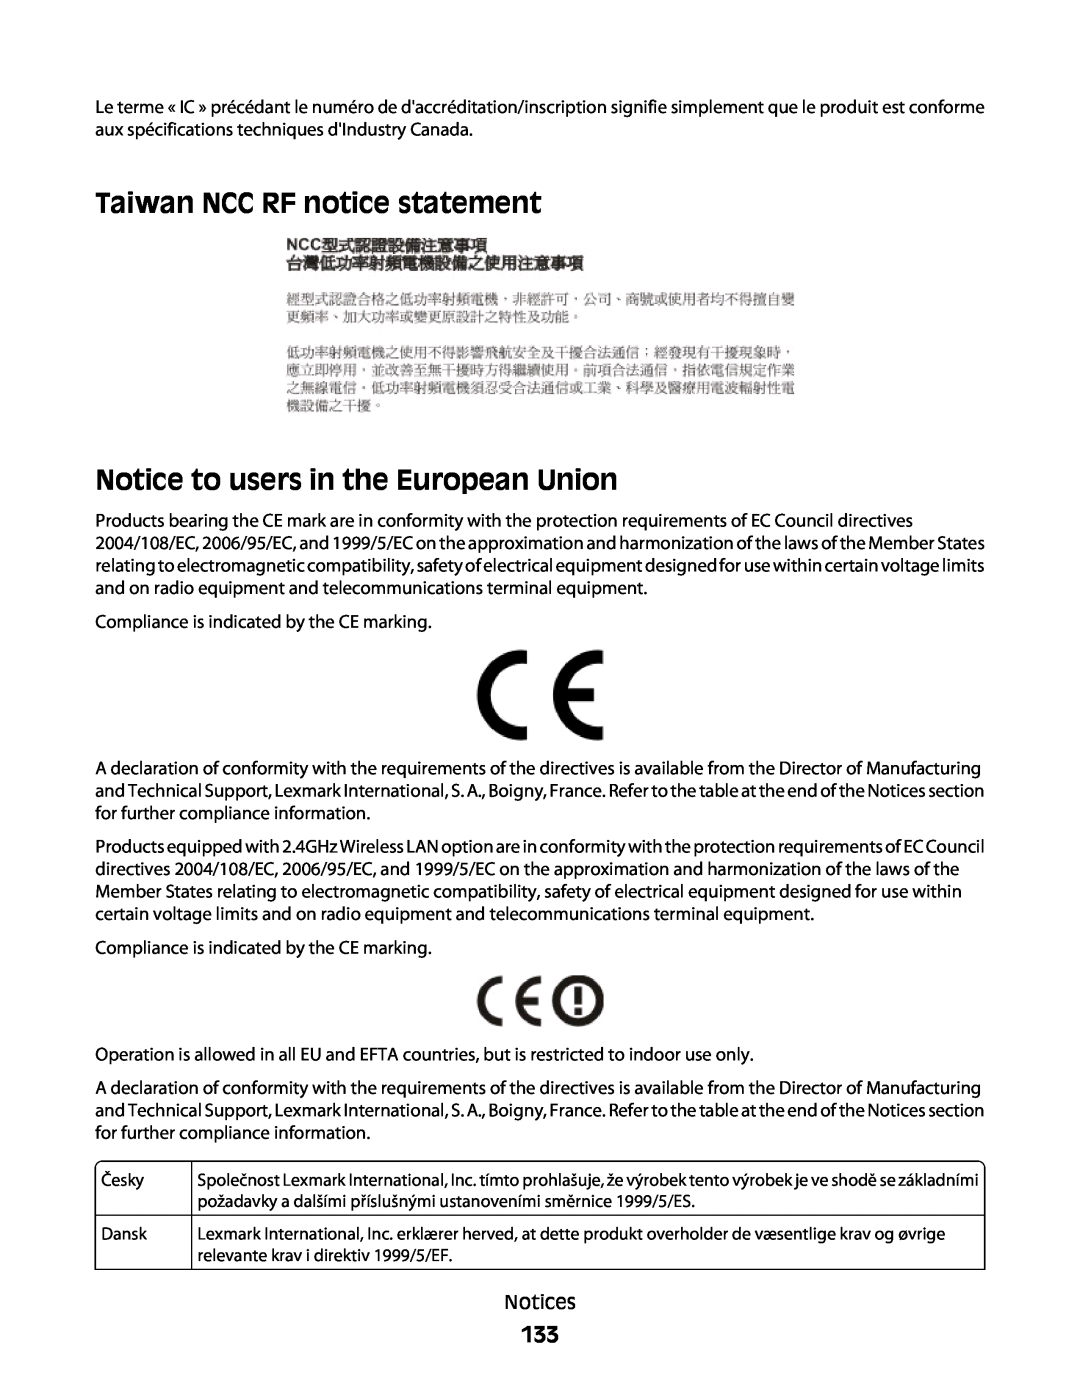 Lexmark 30E, S500, 301 manual Taiwan NCC RF notice statement Notice to users in the European Union 